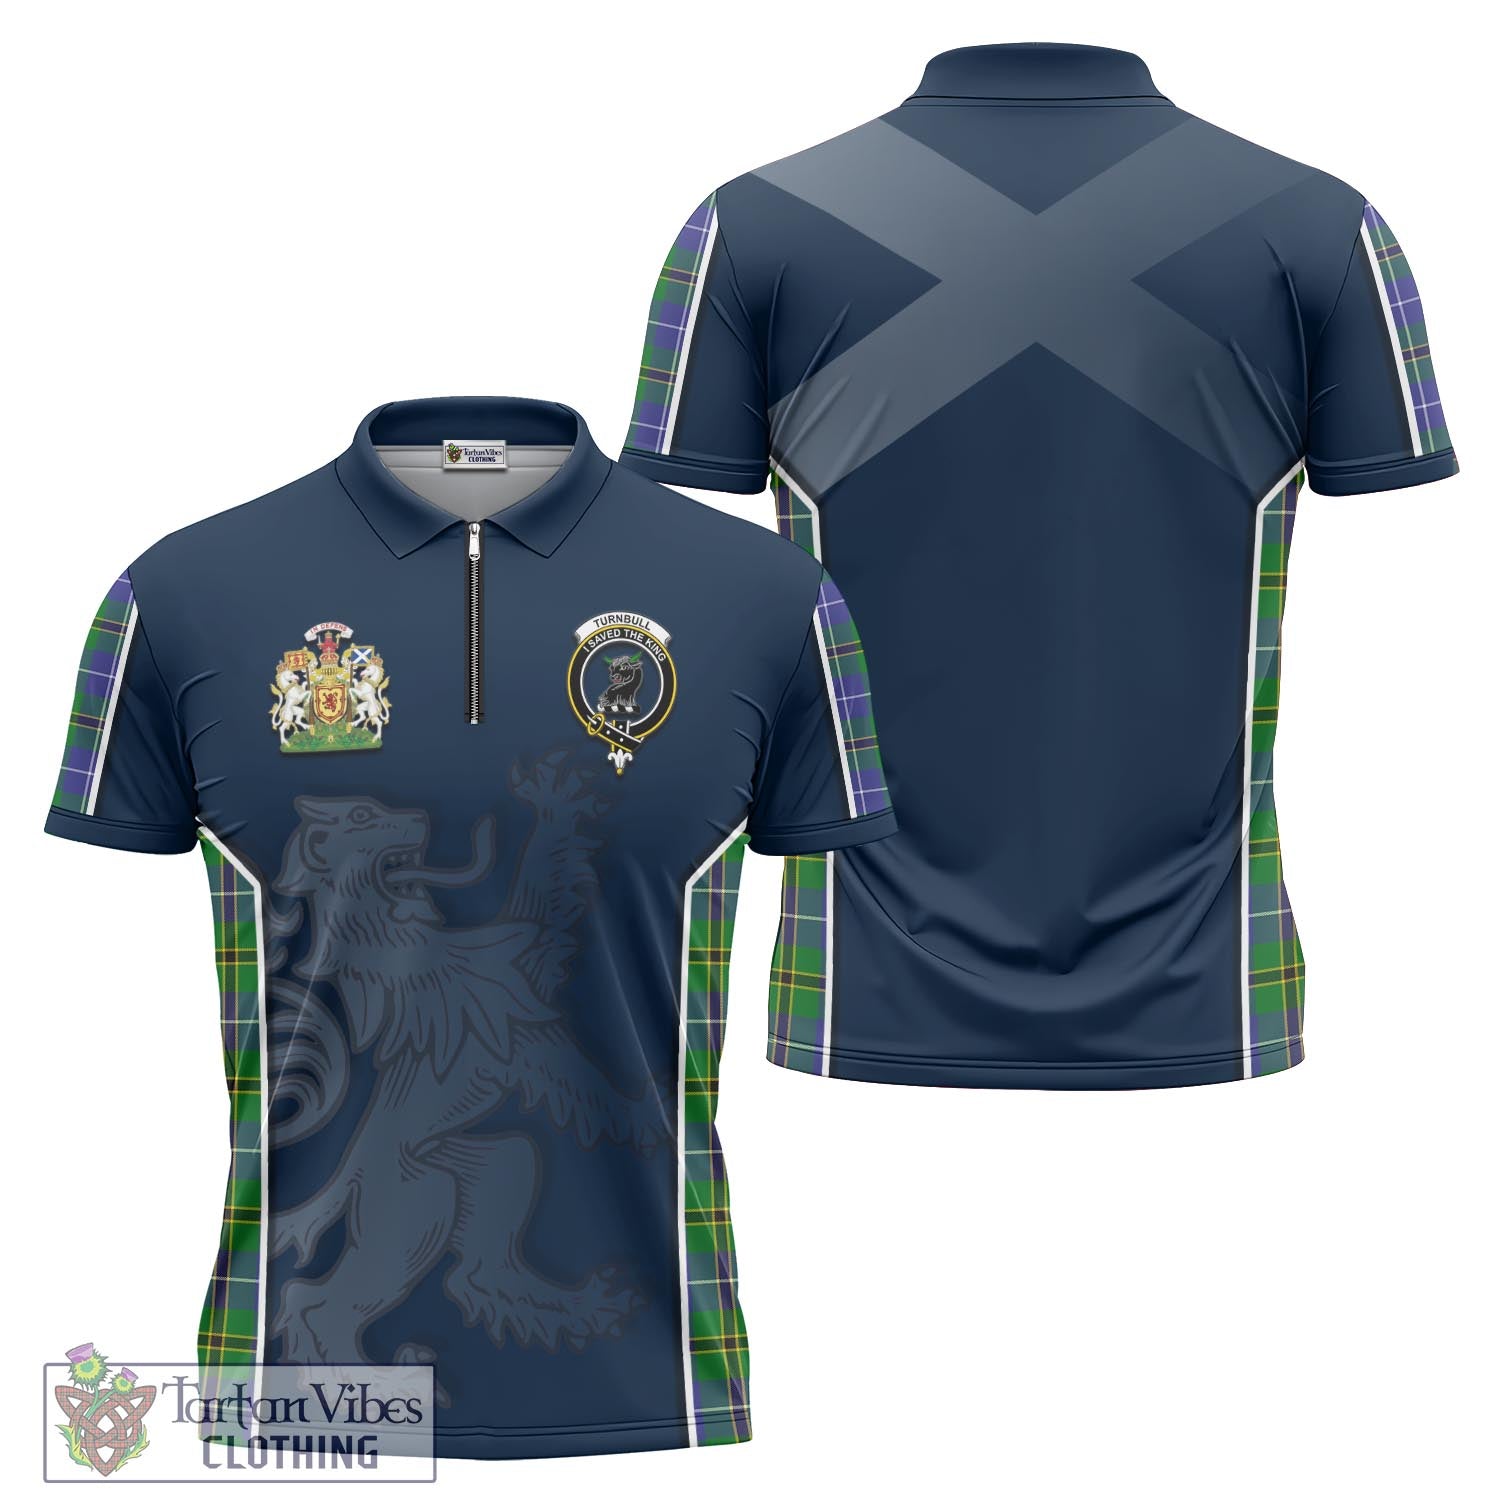 Tartan Vibes Clothing Turnbull Hunting Tartan Zipper Polo Shirt with Family Crest and Lion Rampant Vibes Sport Style